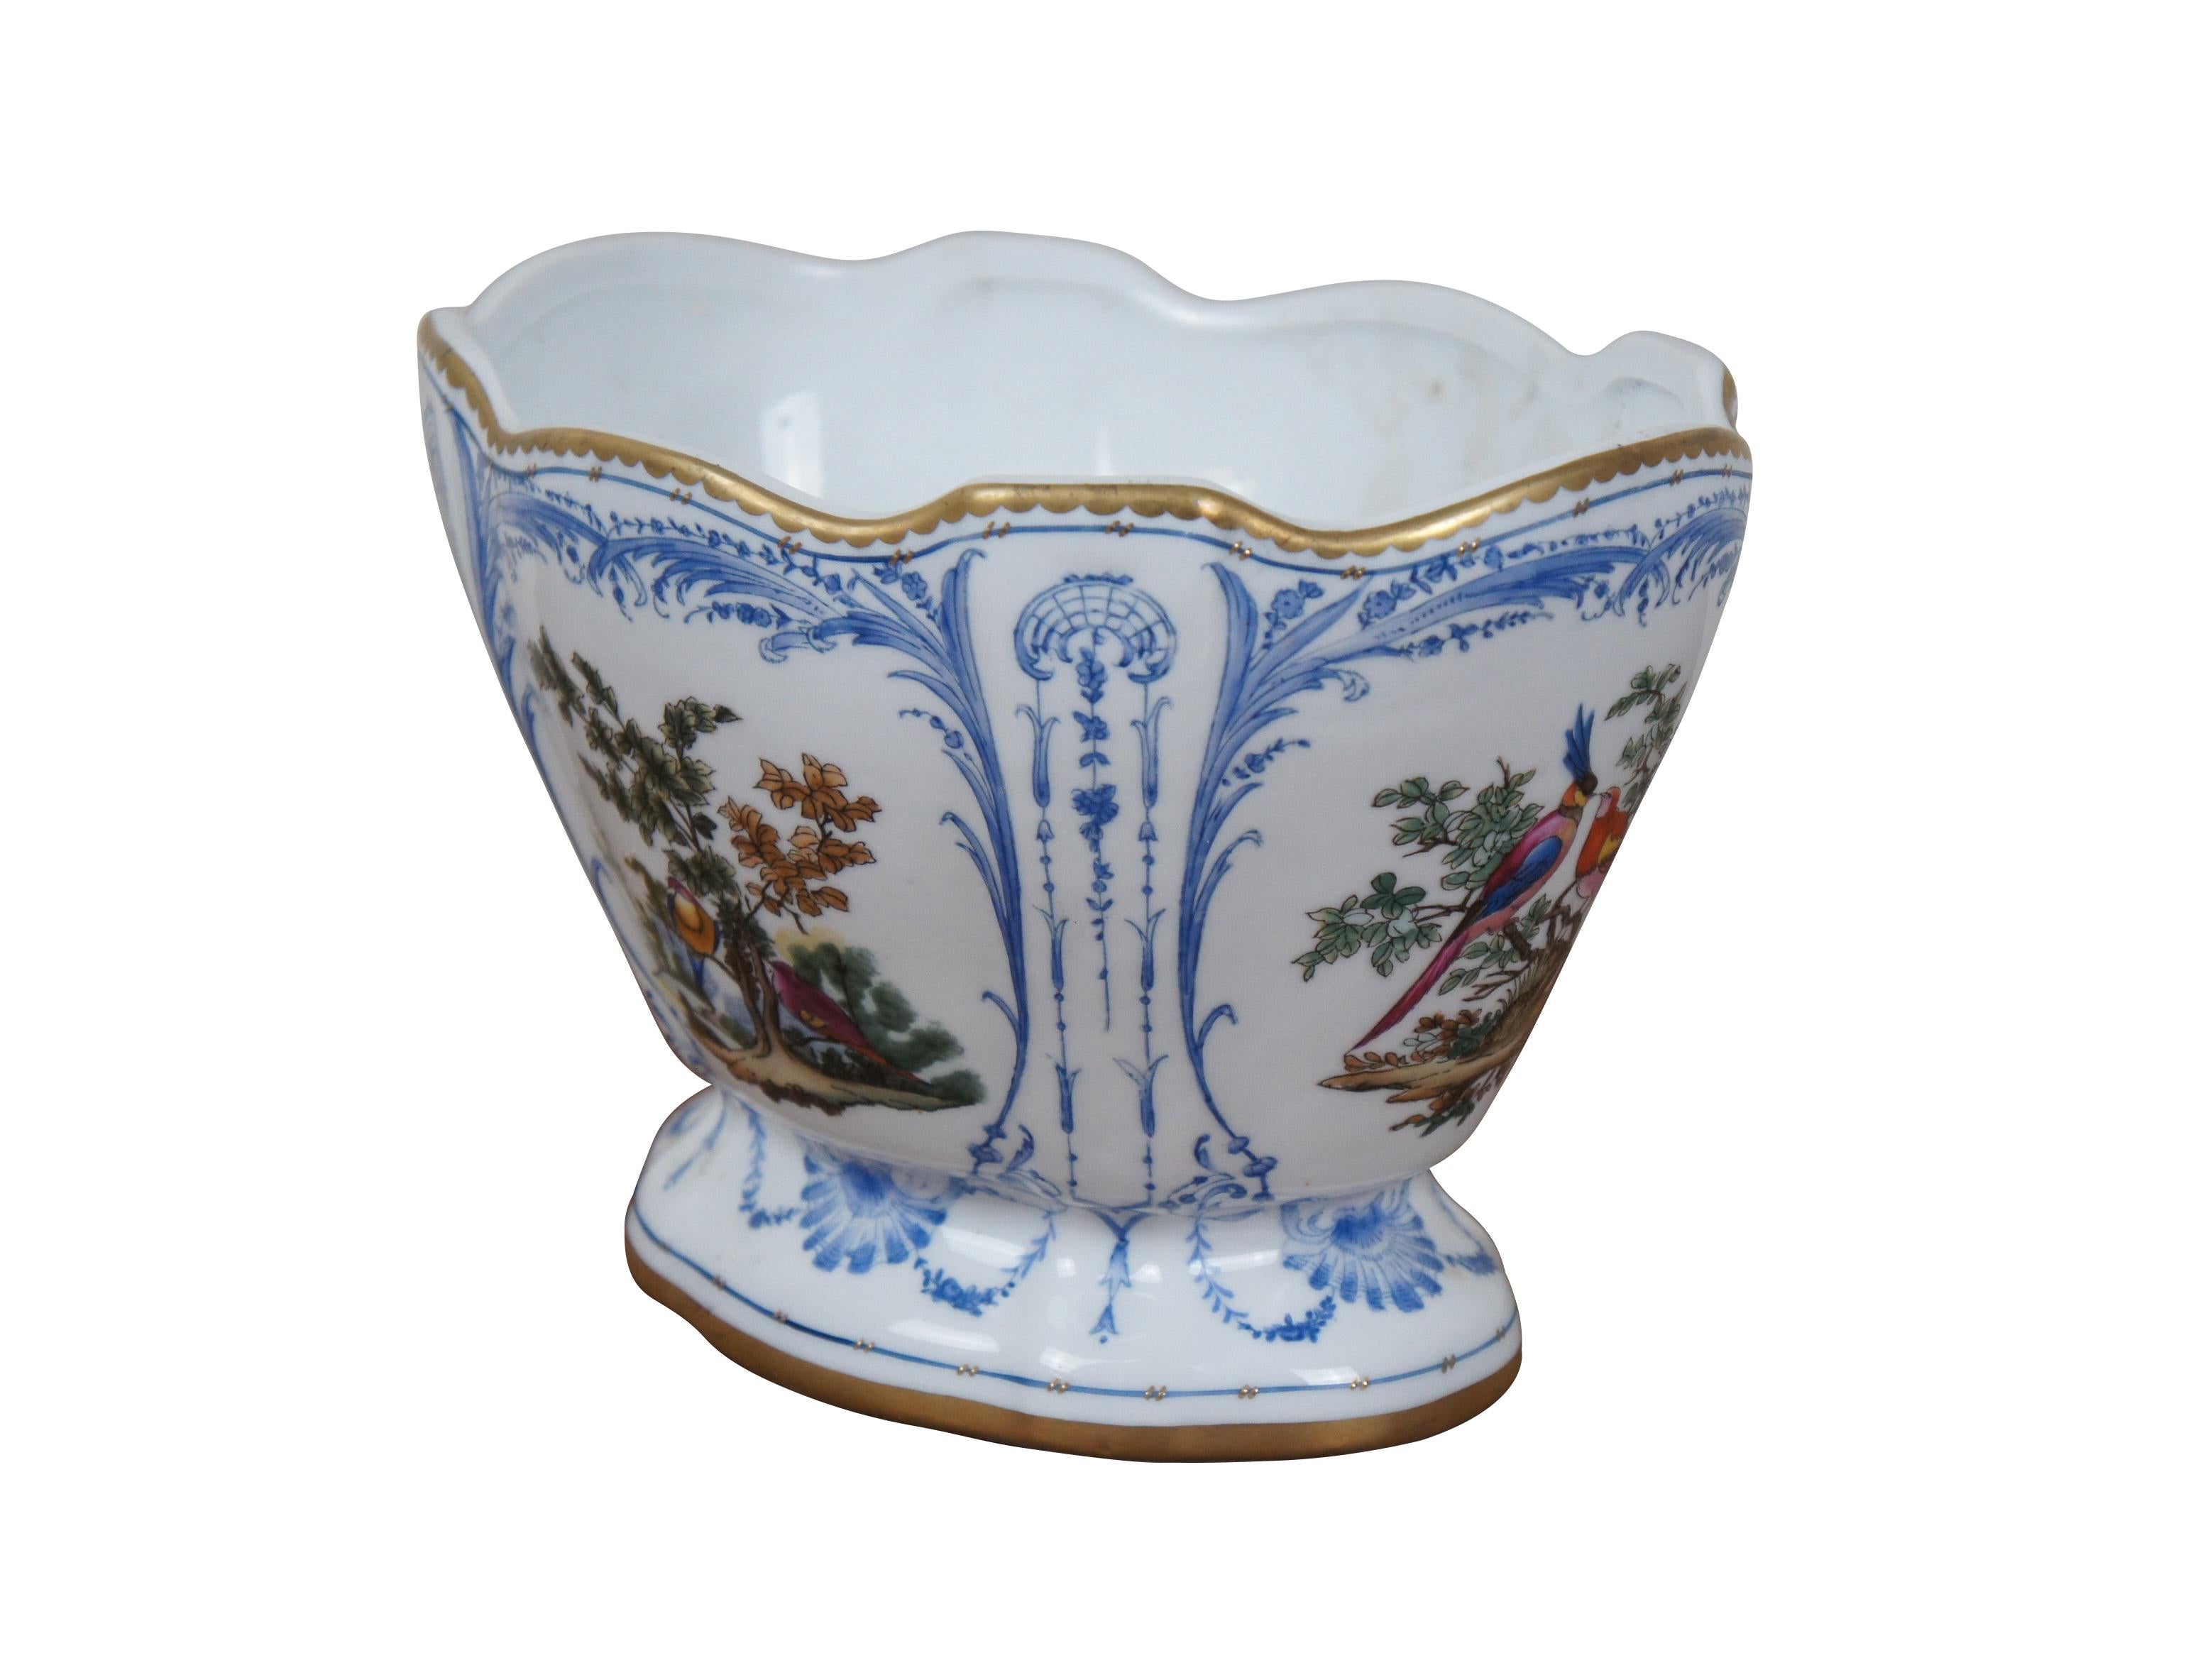 French Desvres style porcelain planter / jardiniere / cachepot / compote / footed centerpiece bowl - oval form with scalloped, gilded edge, tapering to a flared base. Hand painted with delicate blue frames around brightly colored birds on small